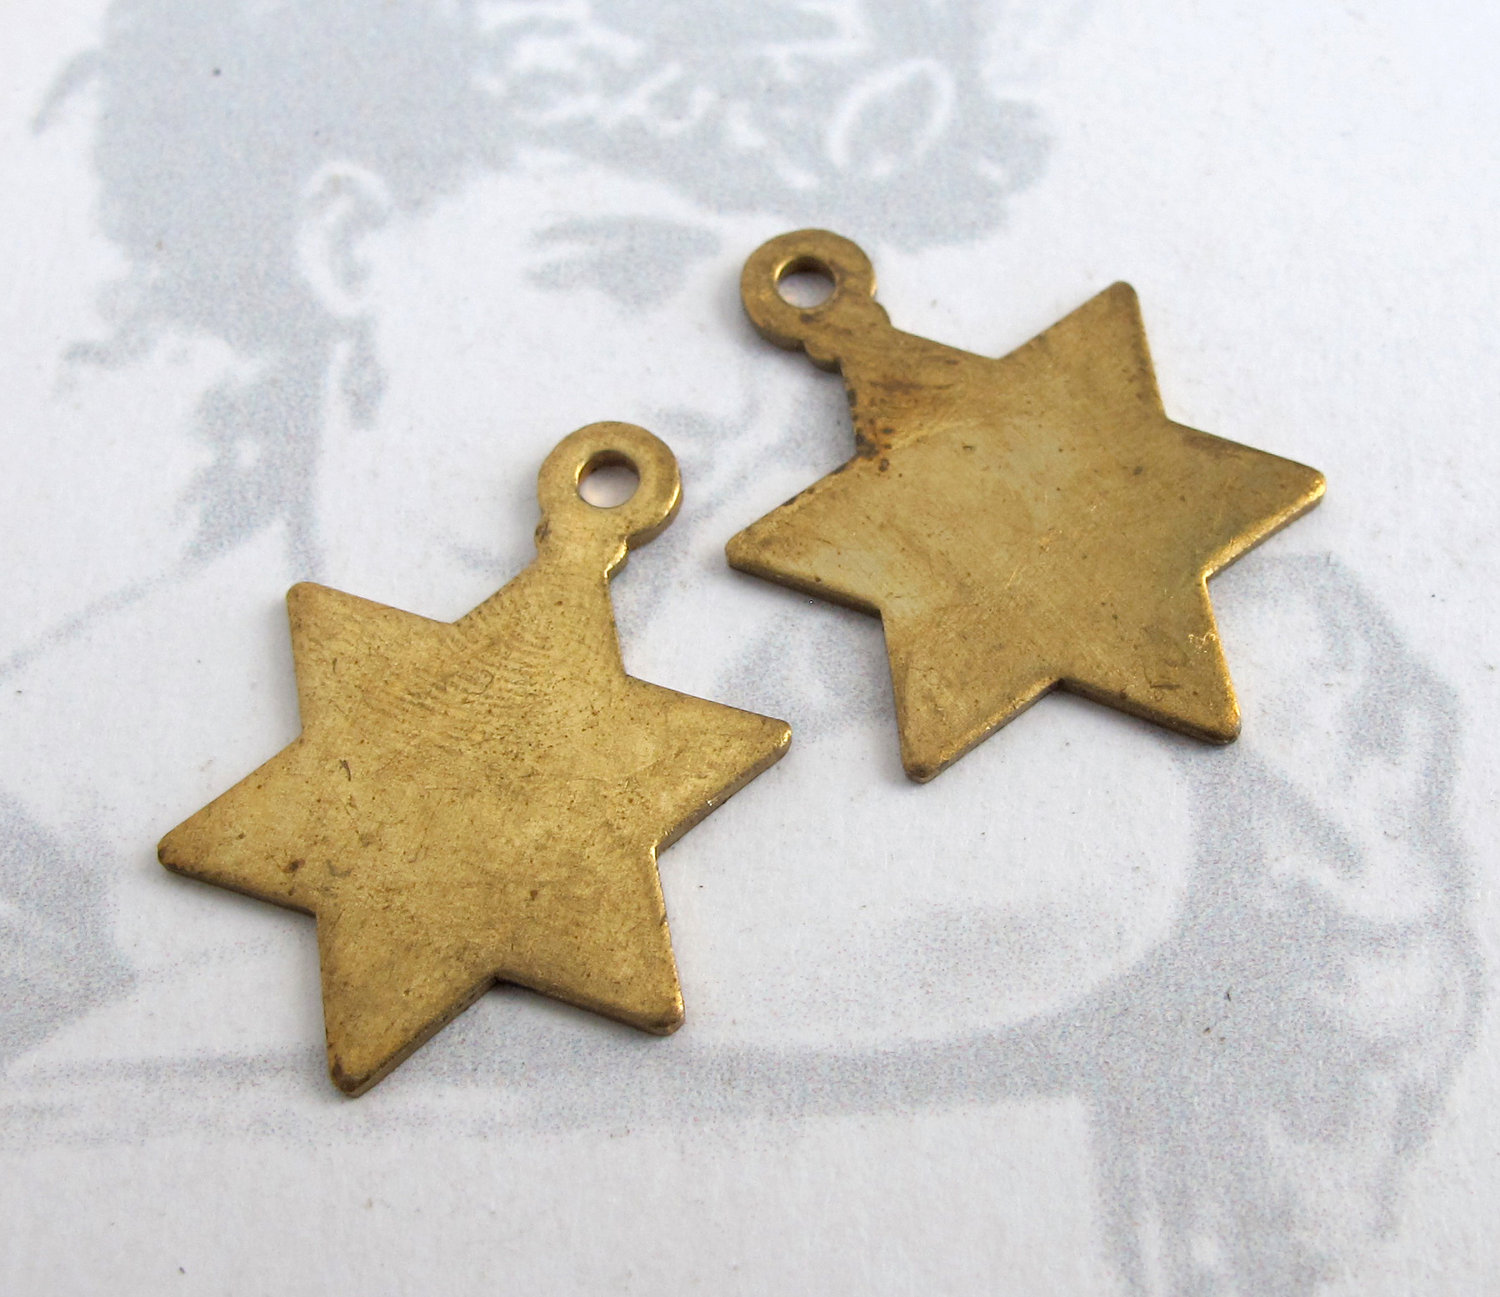 Tarnished Engraving Red Brass Cross Charms